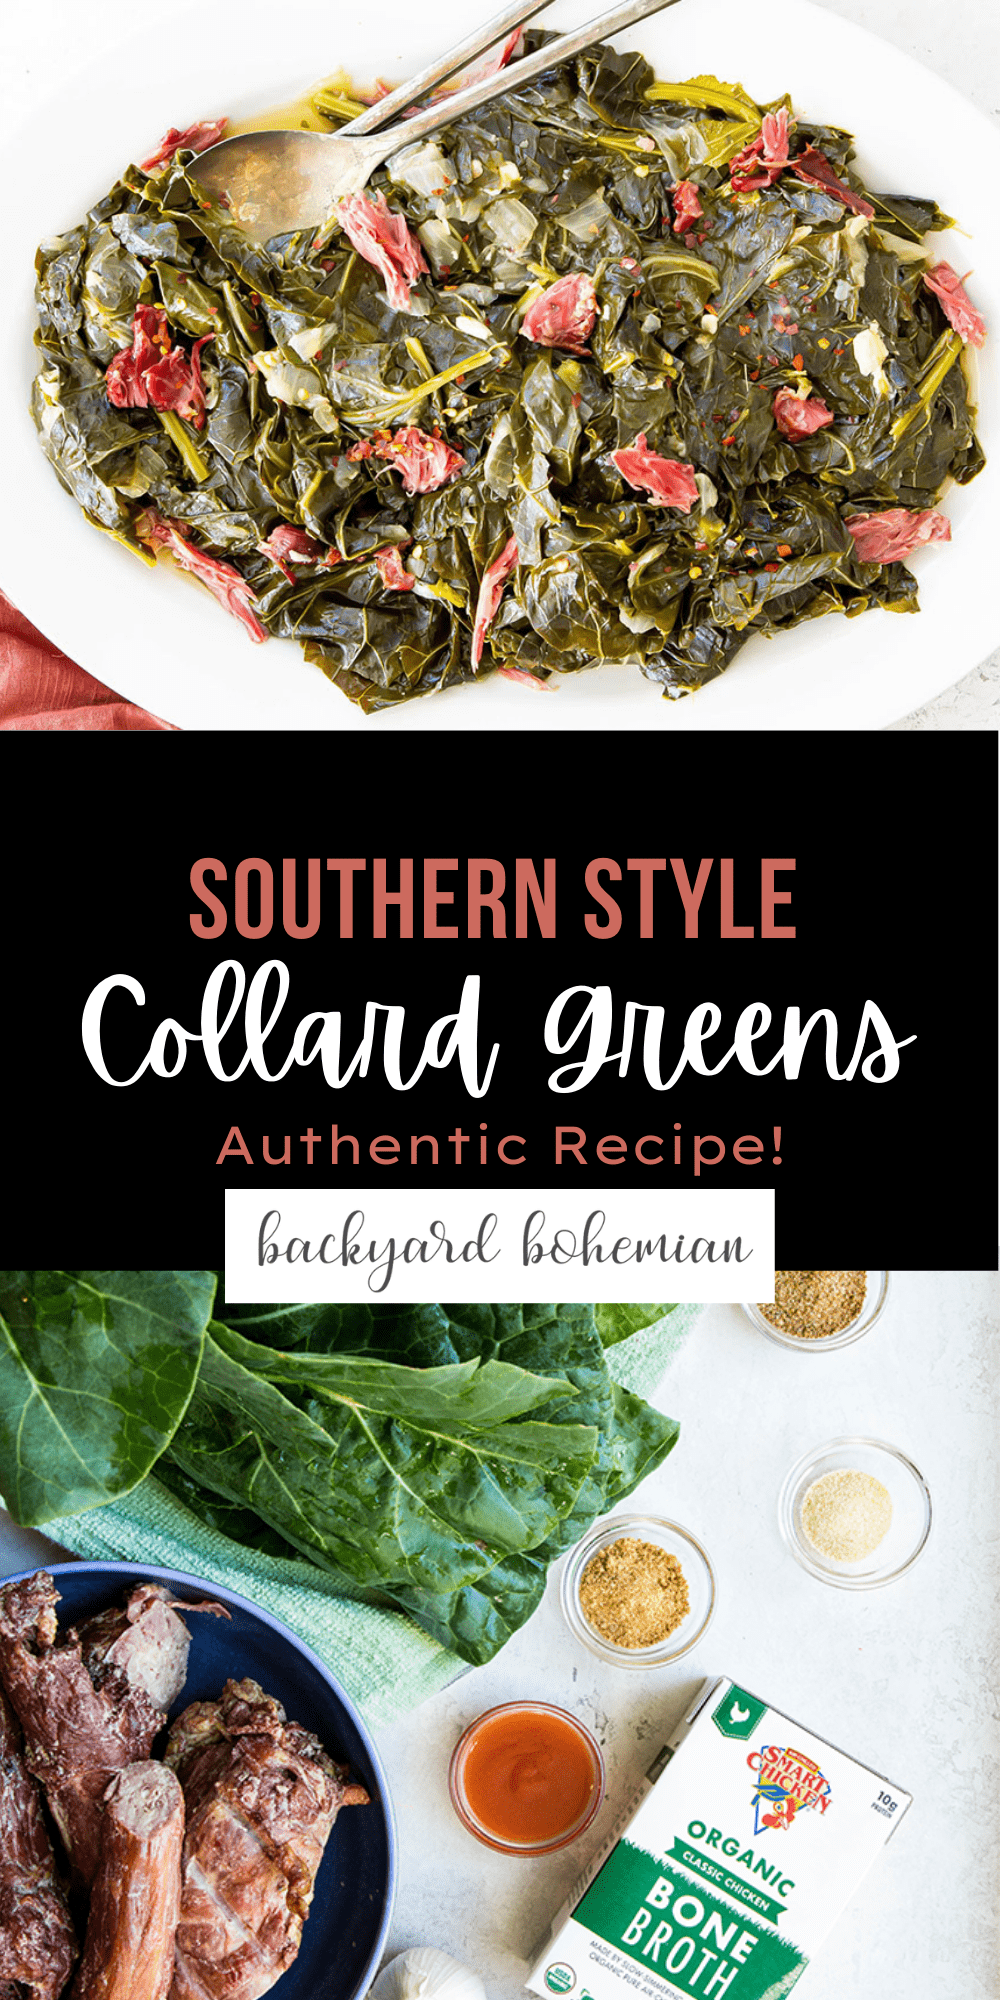 Southern style collard greens are simmered for hours with smoked turkey necks and loads of seasoning to provide the most velvety, decadent greens you've ever had! This is a true southern recipe that has been passed down for generations!